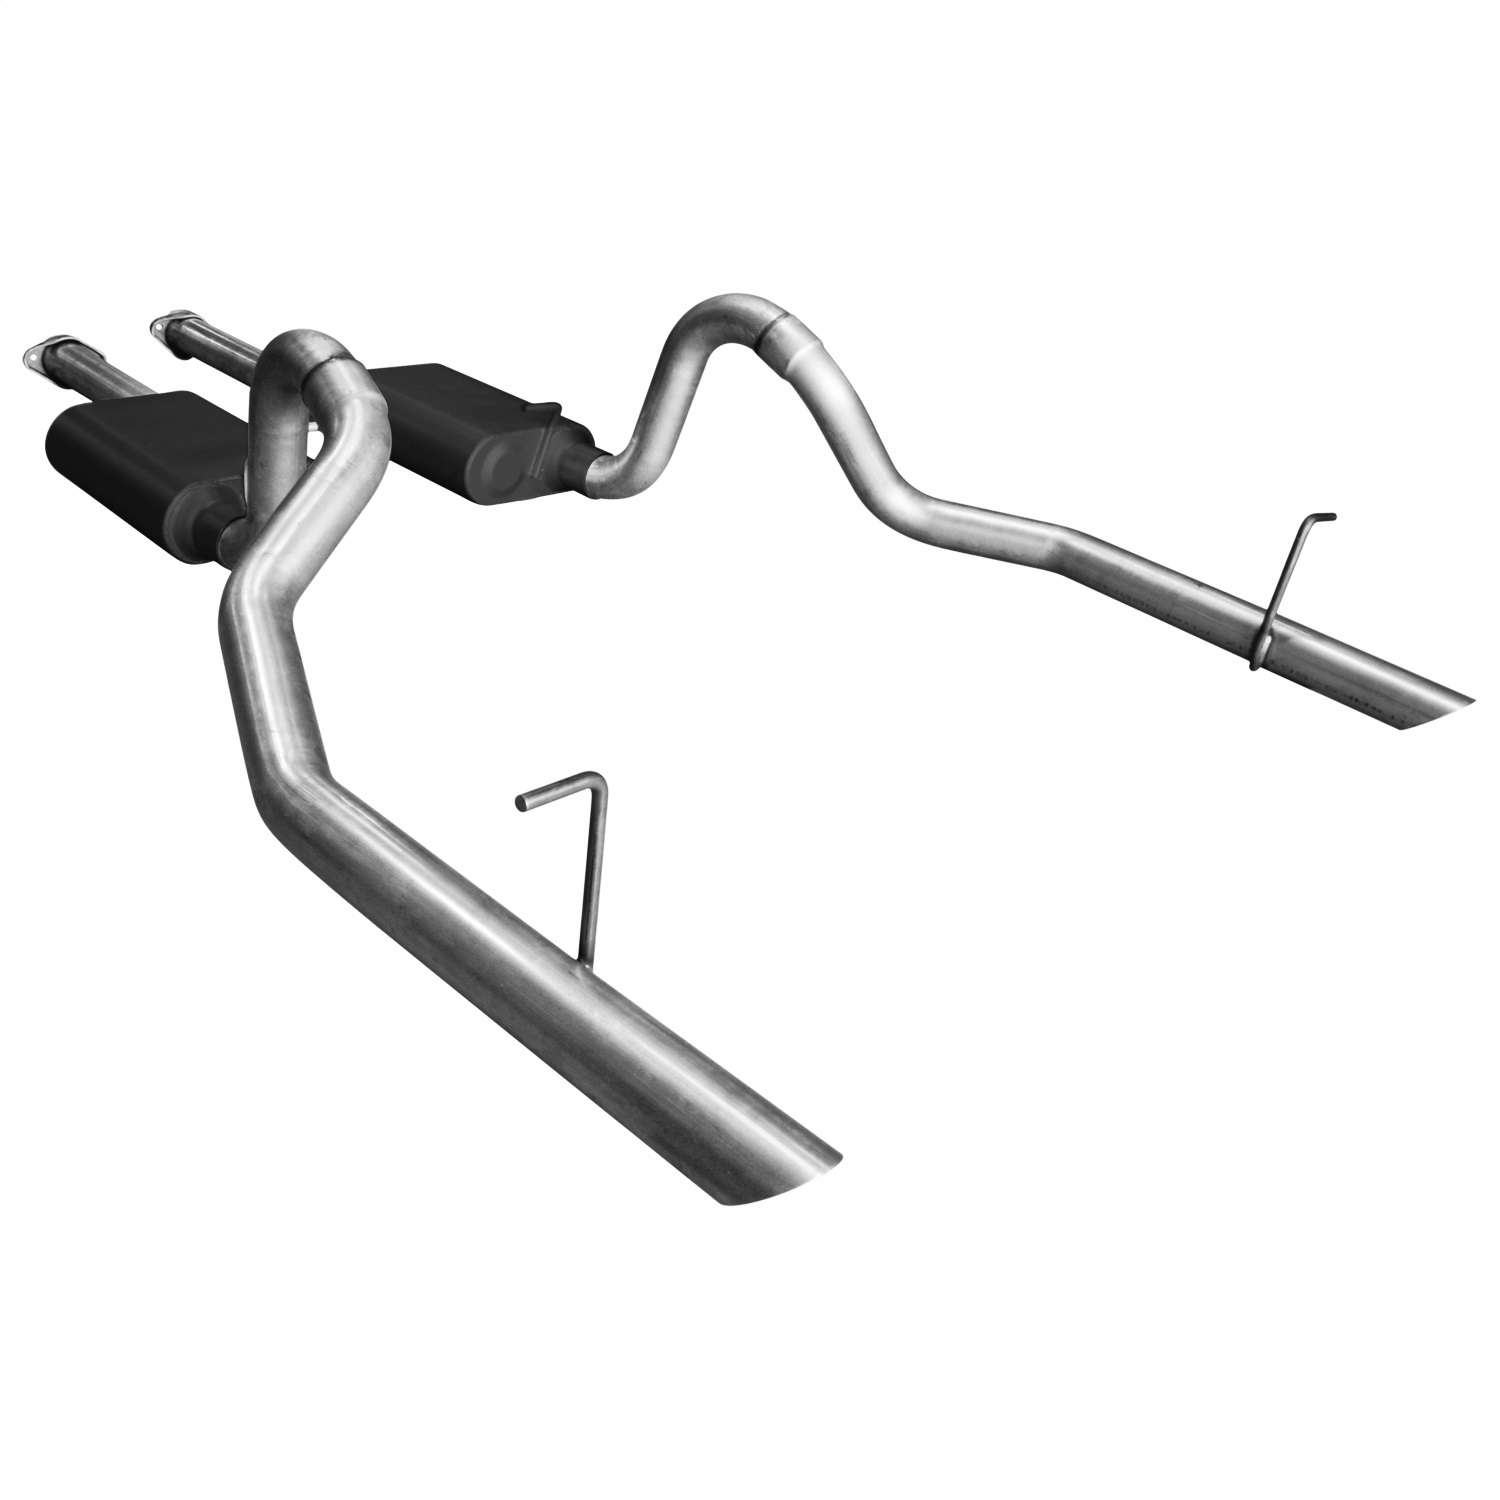 Flowmaster Flowmaster 17112 American Thunder Cat Back Exhaust System Fits 94-97 Mustang